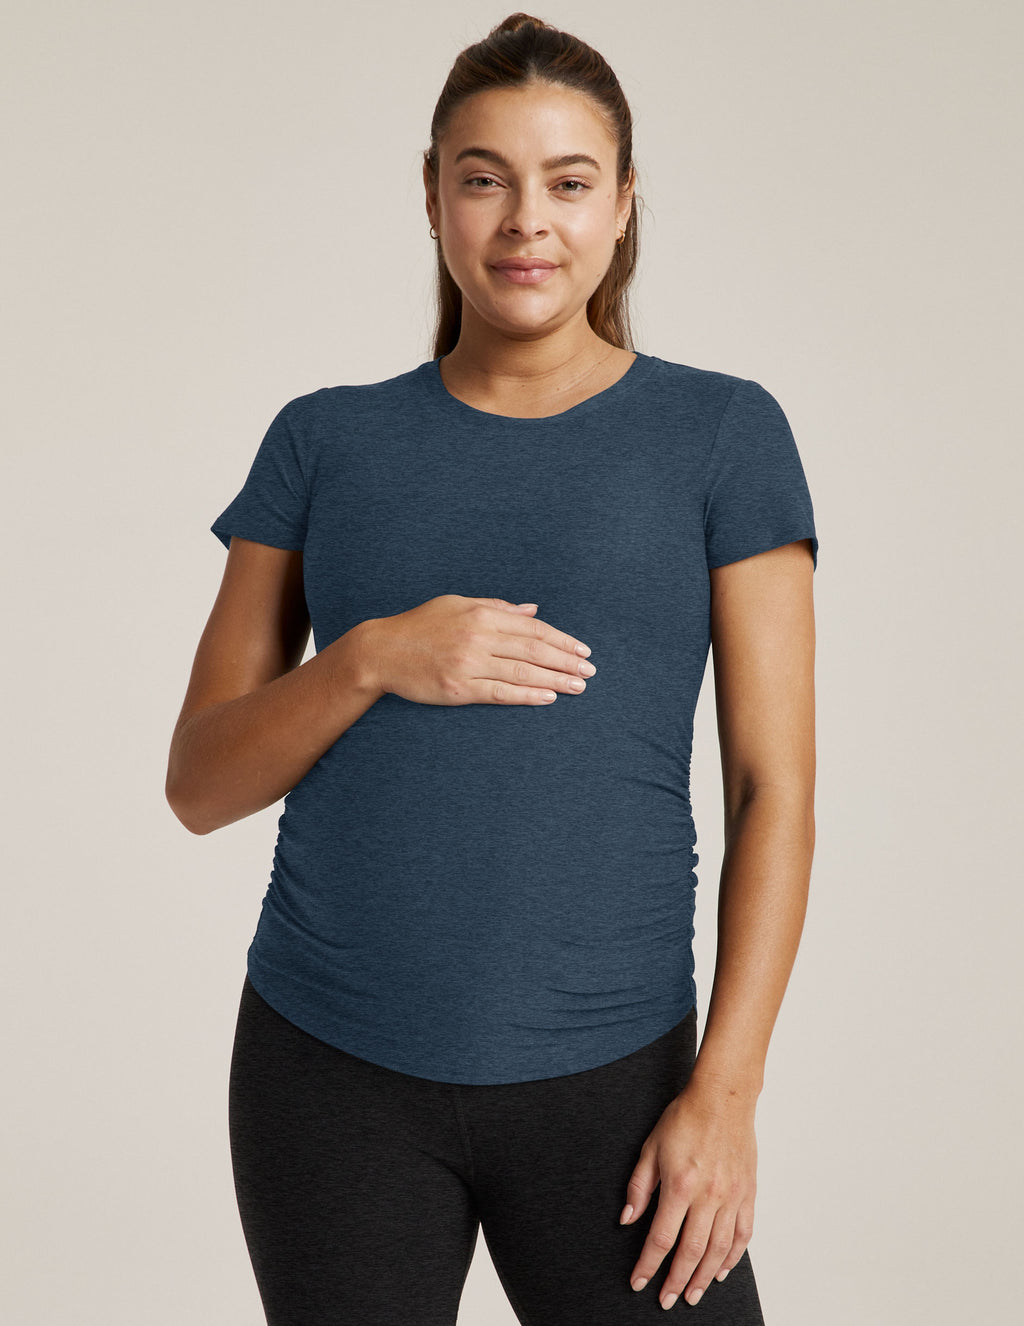 Featherweight One & Only Maternity Tee Secondary Image